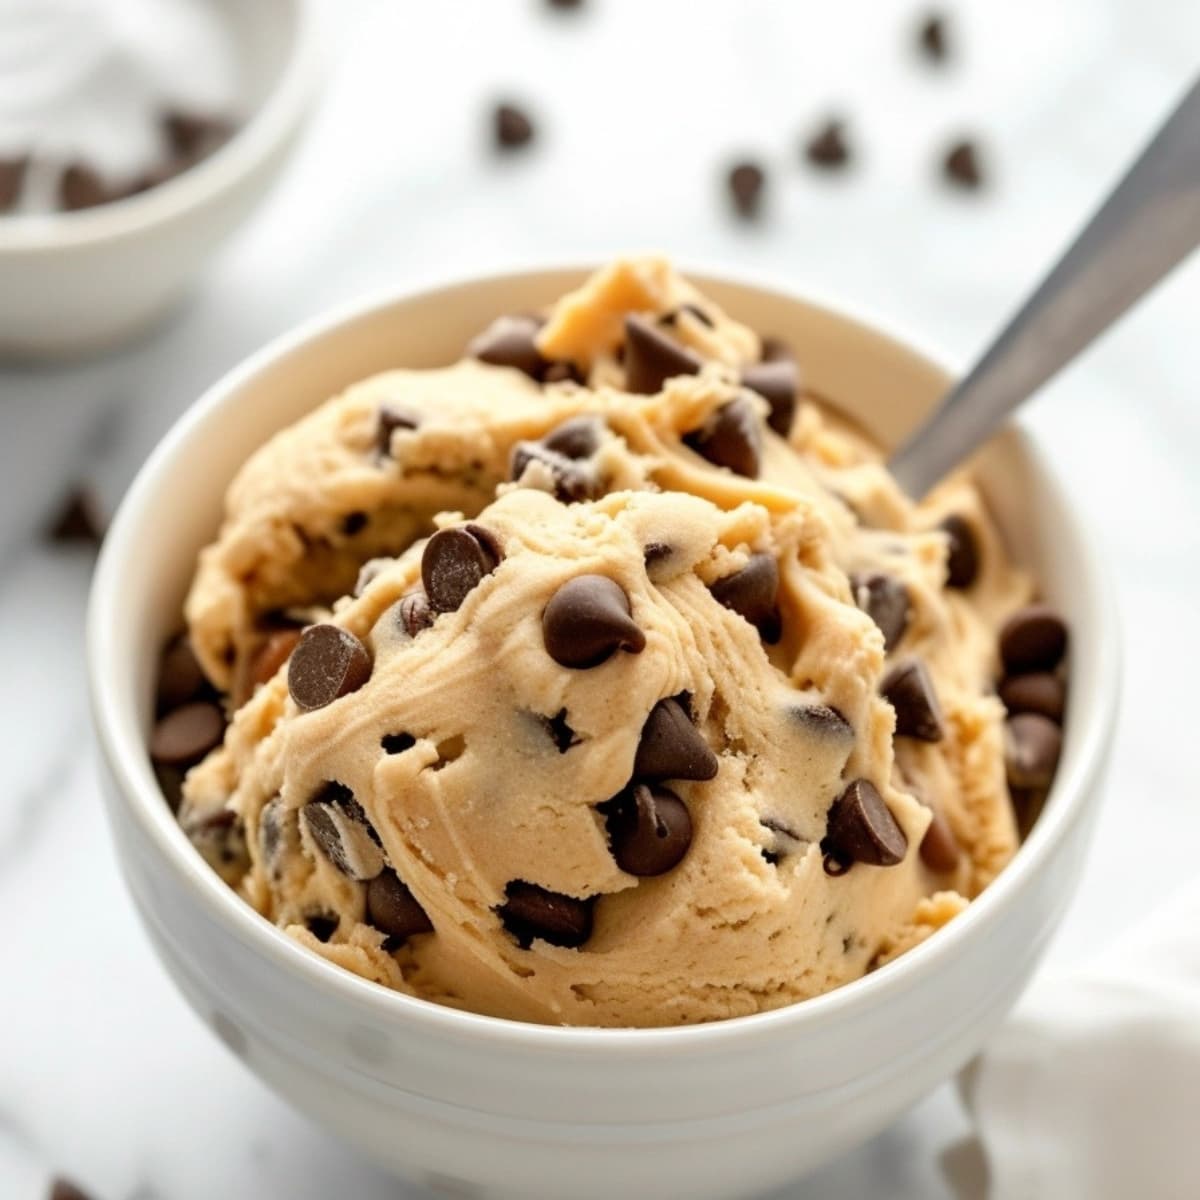 Edible cookie dough with chocolate chips and spoon.